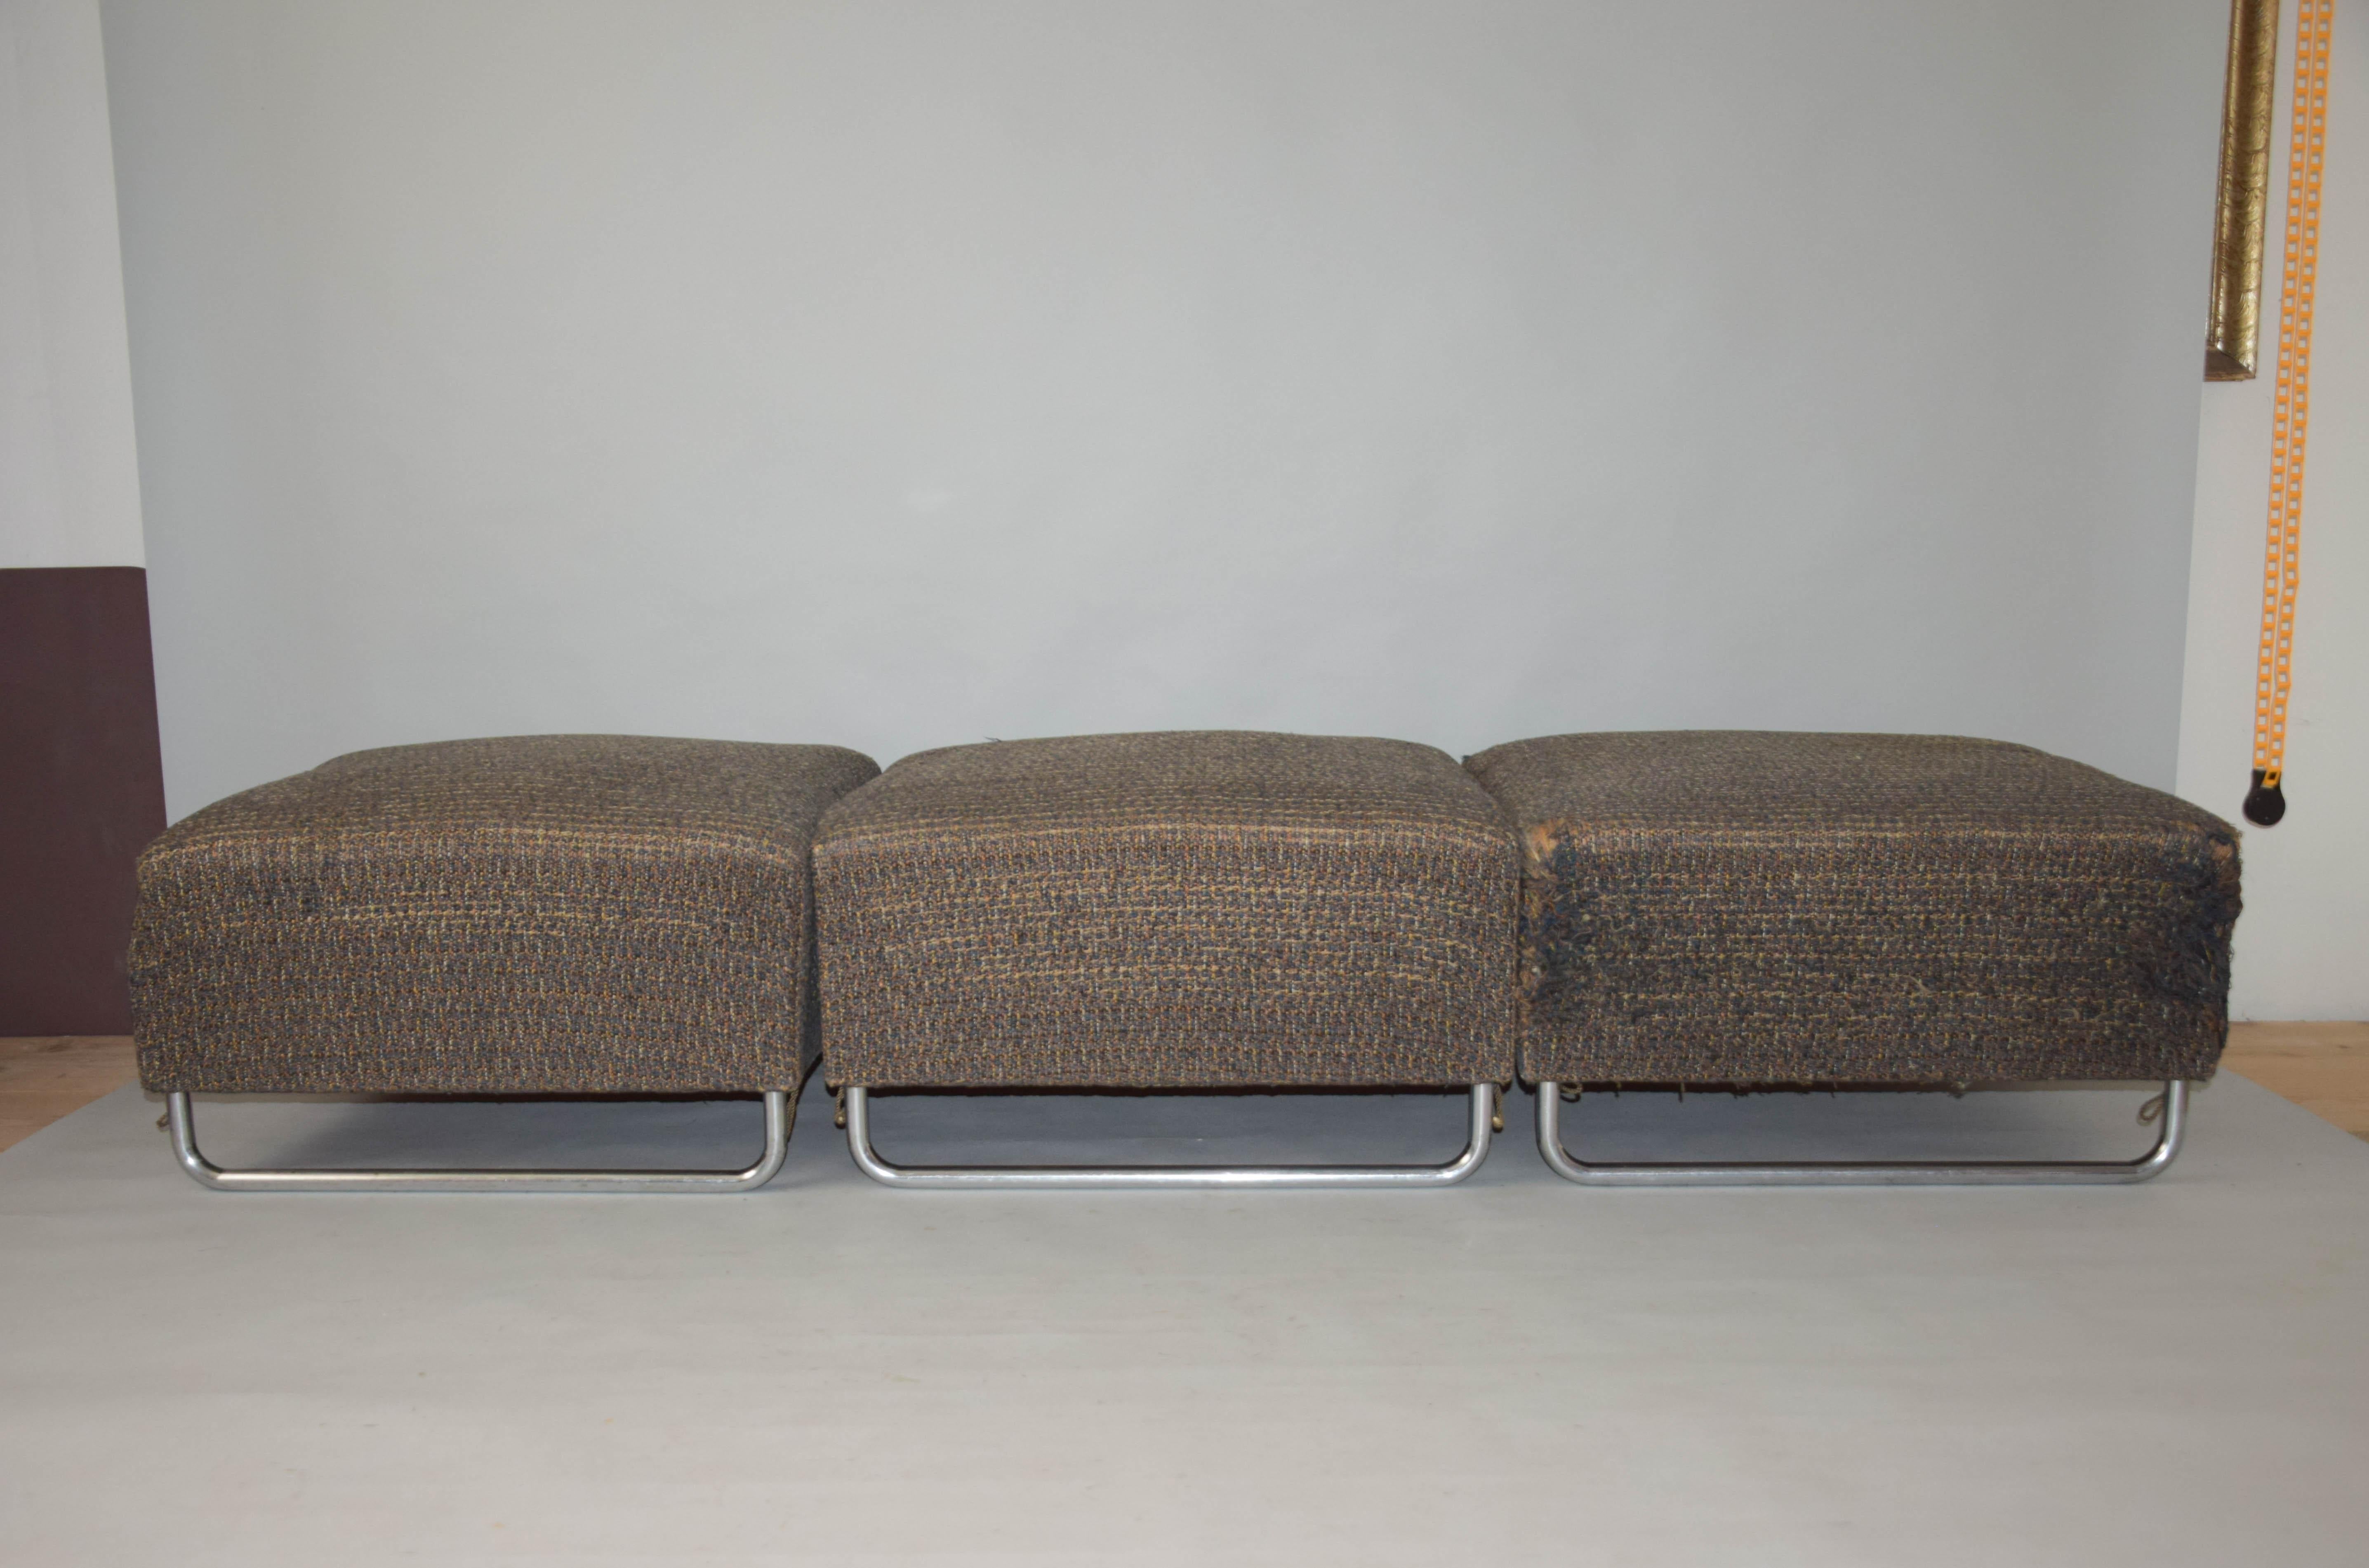 - antique variable sofa or daybed model H-120 (185x74cm or 220x60cm).
- Extremely rare set of three stools designed by Jindrich Halabala in 1930s. 
- Each stool can be used separately
- Manufactured by ÚP závody Brno
- functionalism
-  Chrome-plated